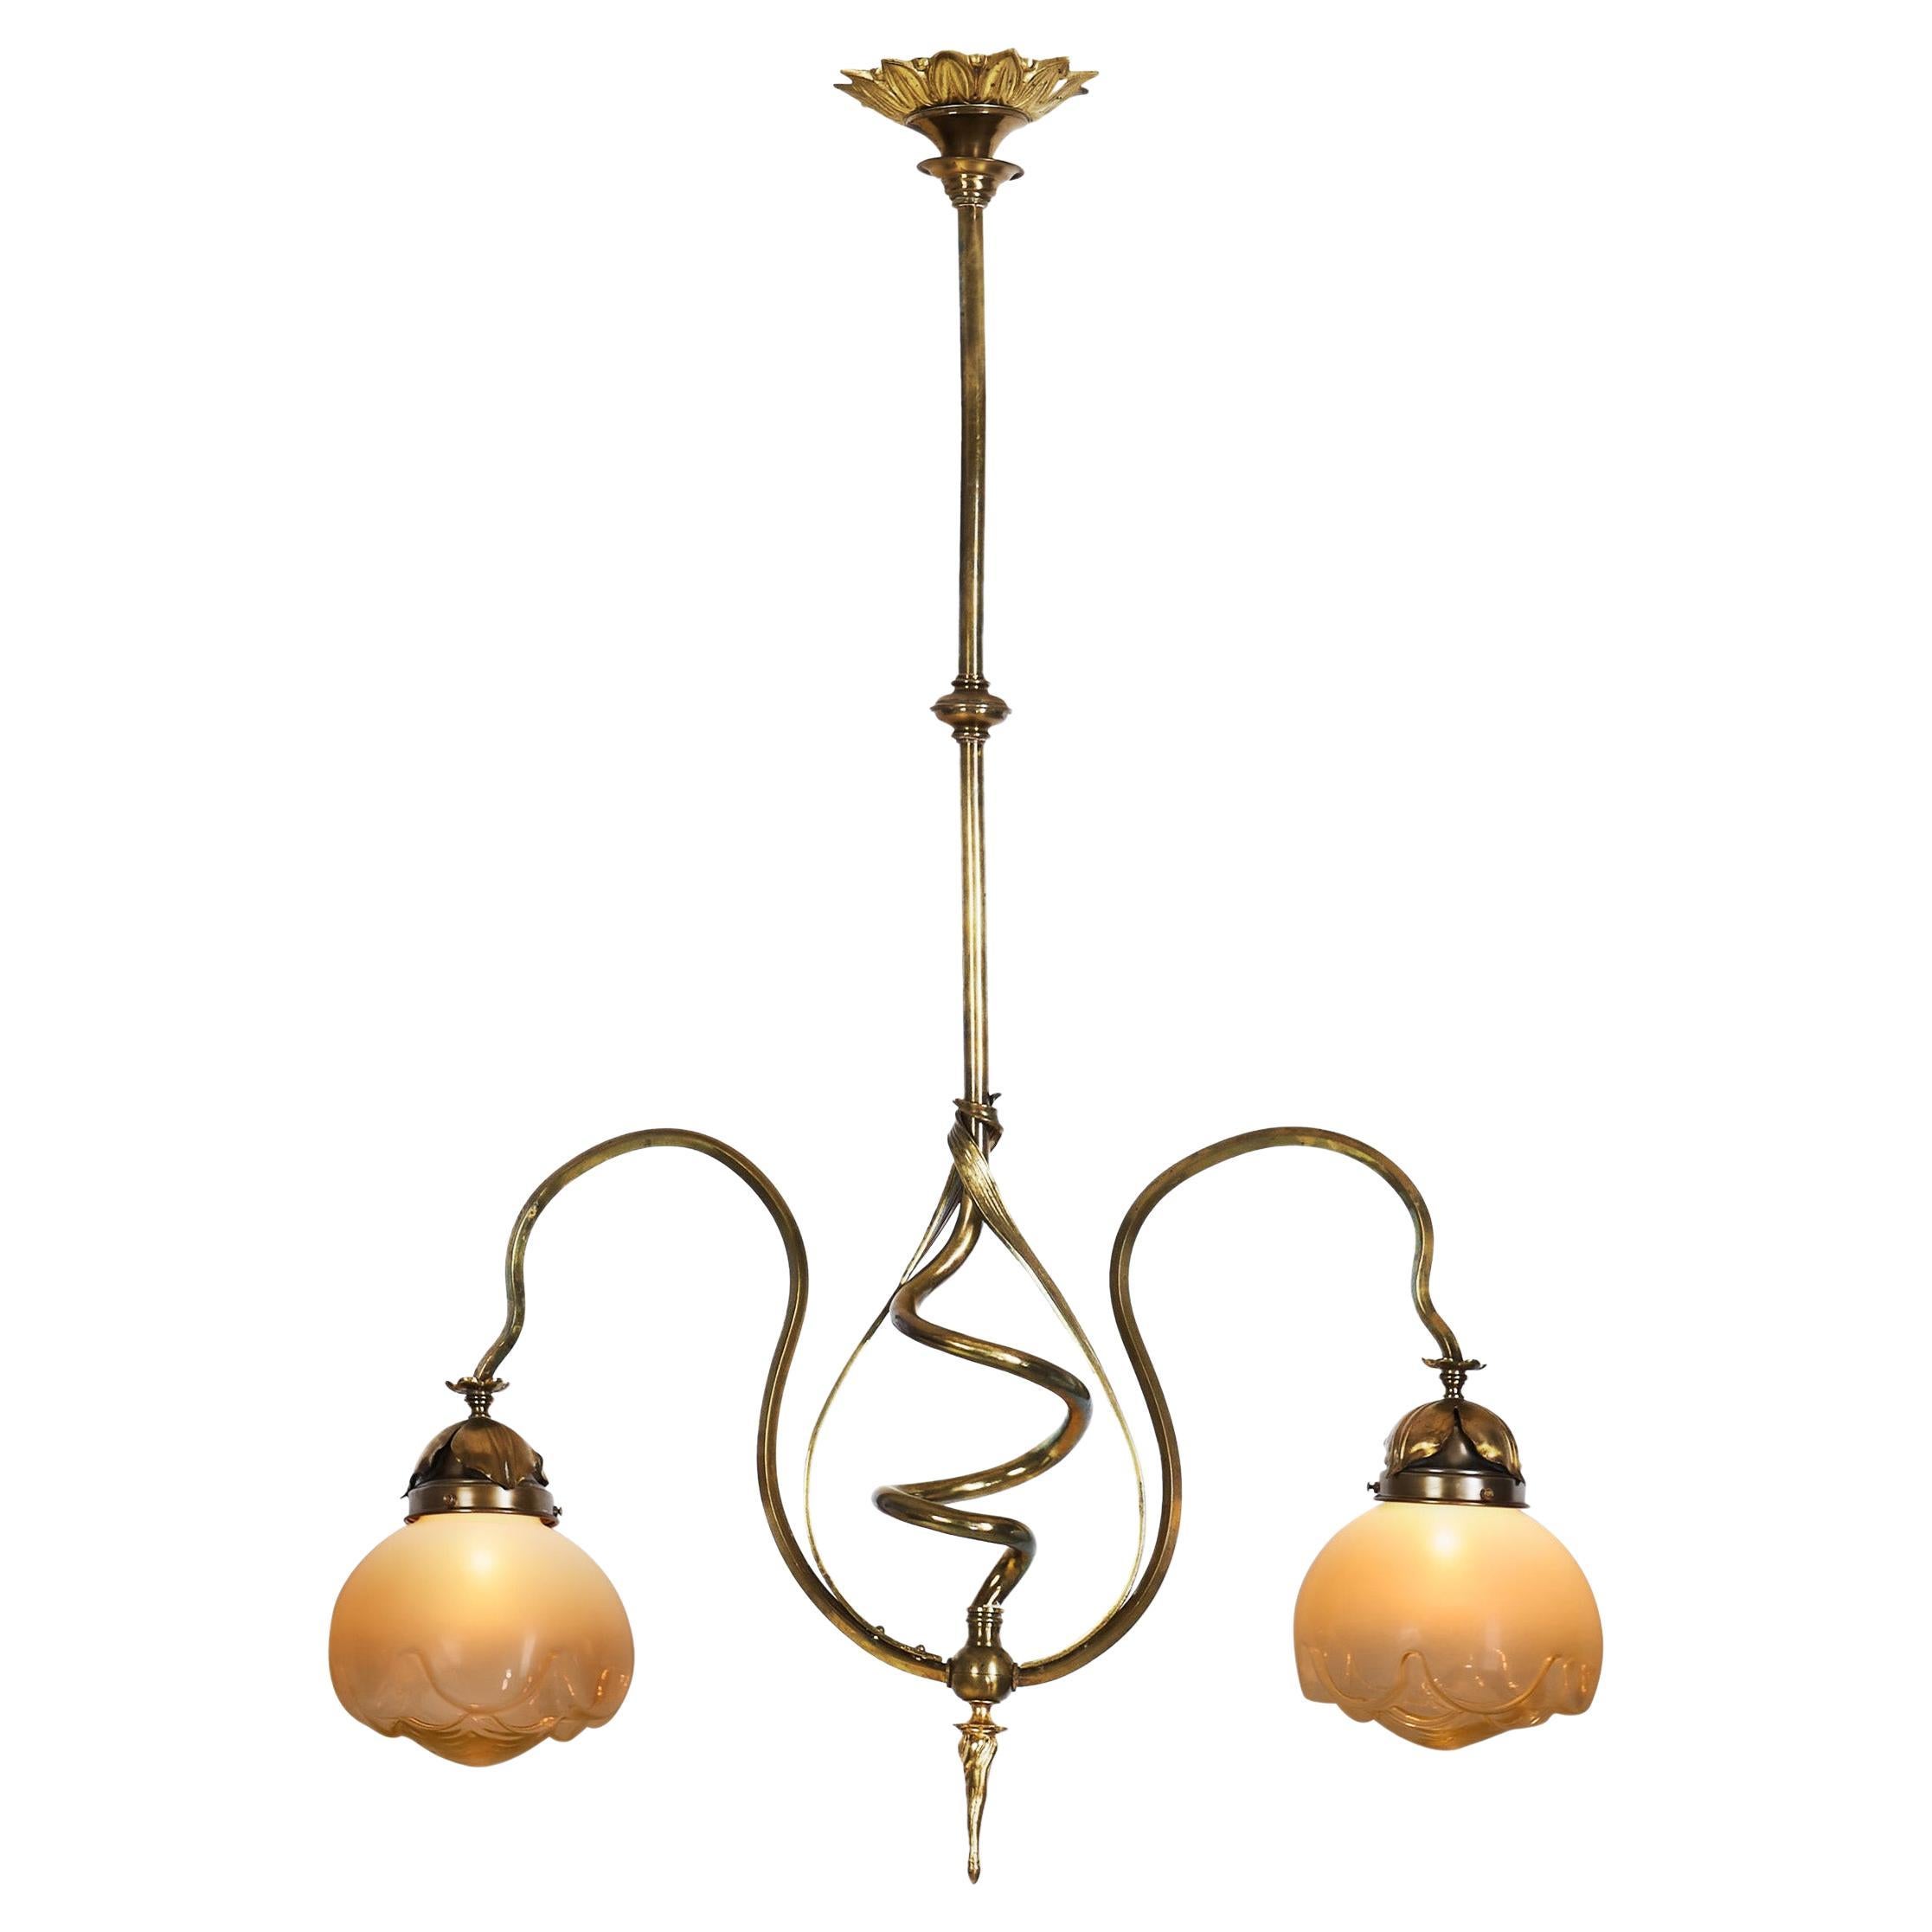 Jugend Ceiling Lamp in Patinated Brass and Glass, Europe early 20th century For Sale